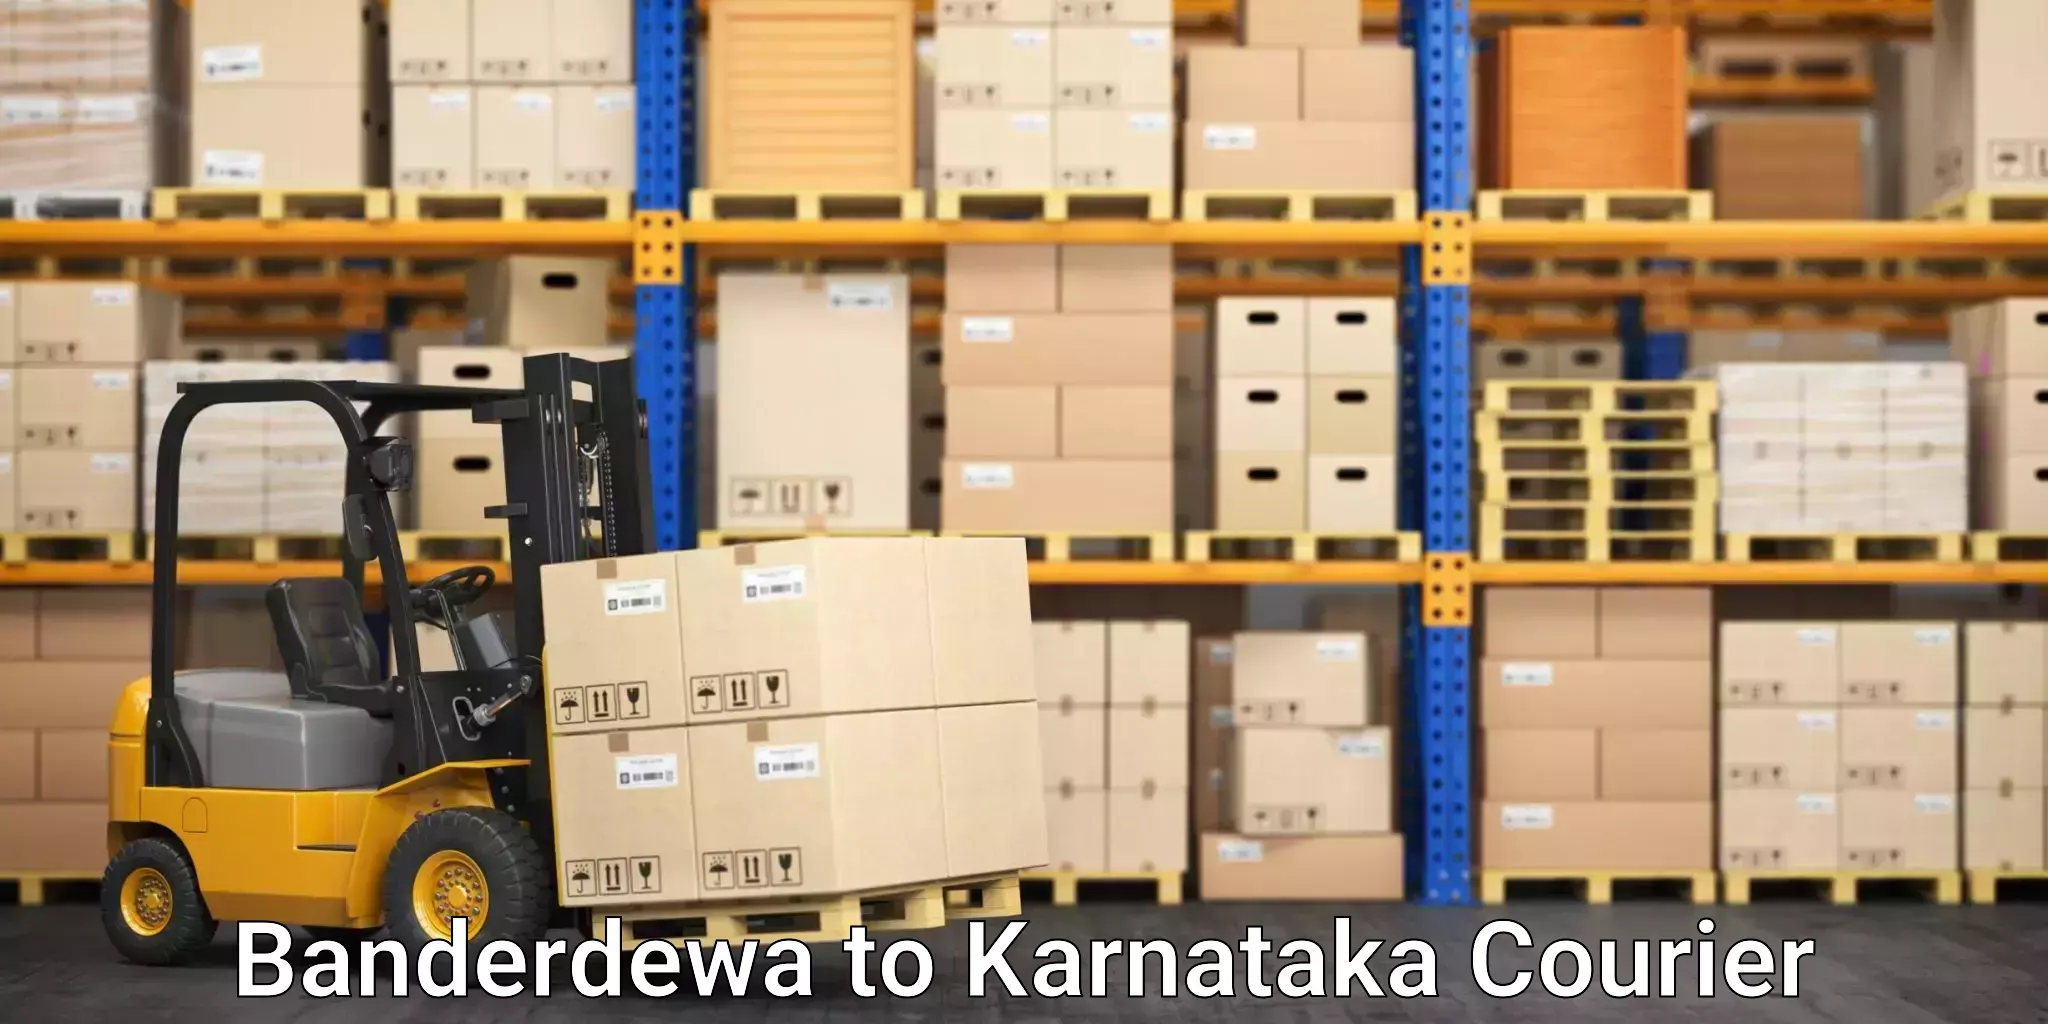 Multi-national courier services Banderdewa to Ankola